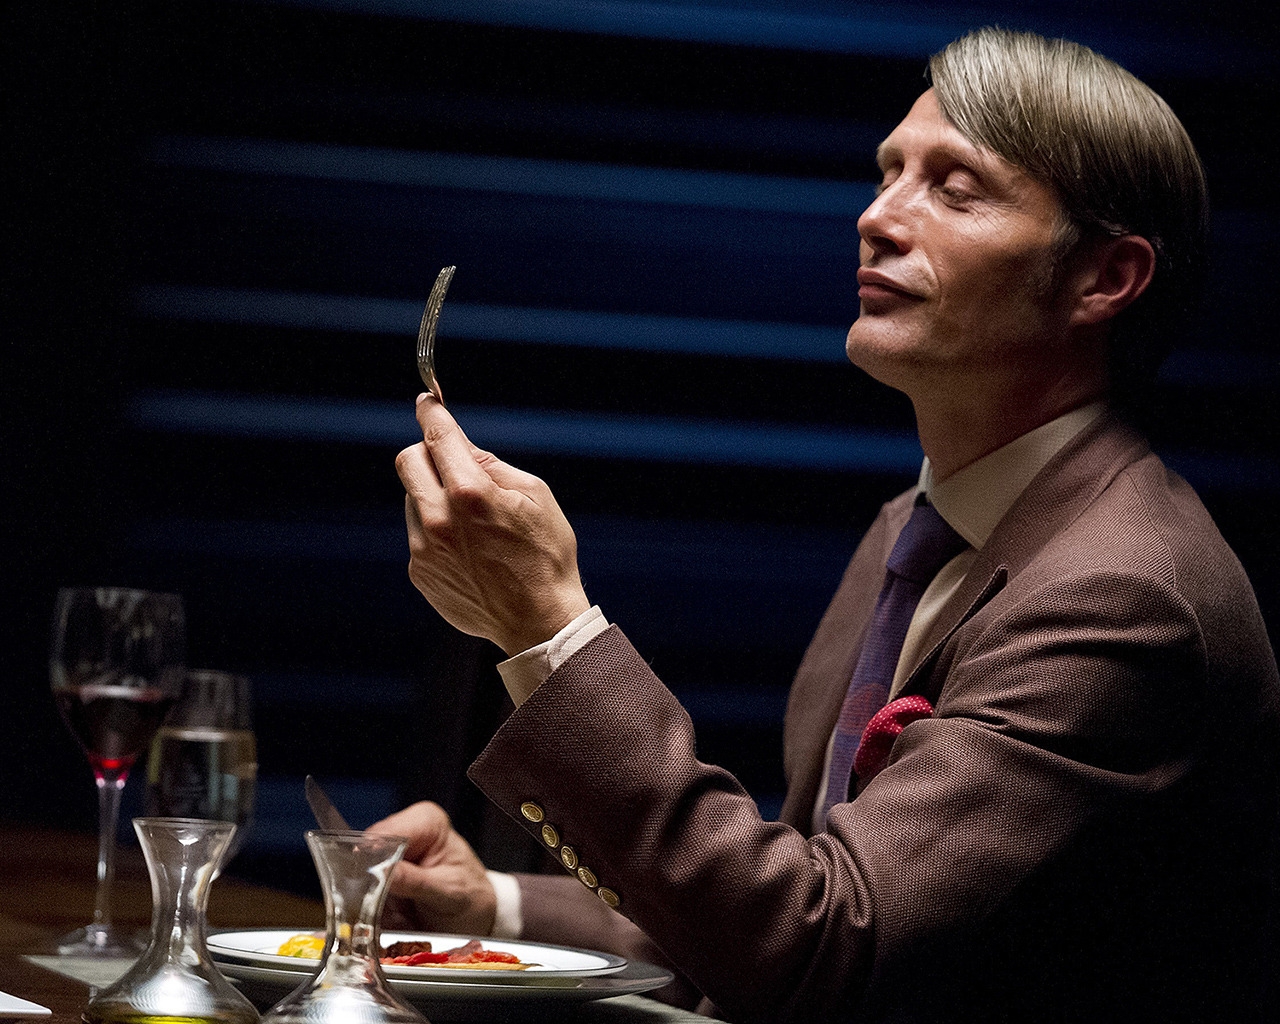 Hannibal 2013 for 1280 x 1024 resolution